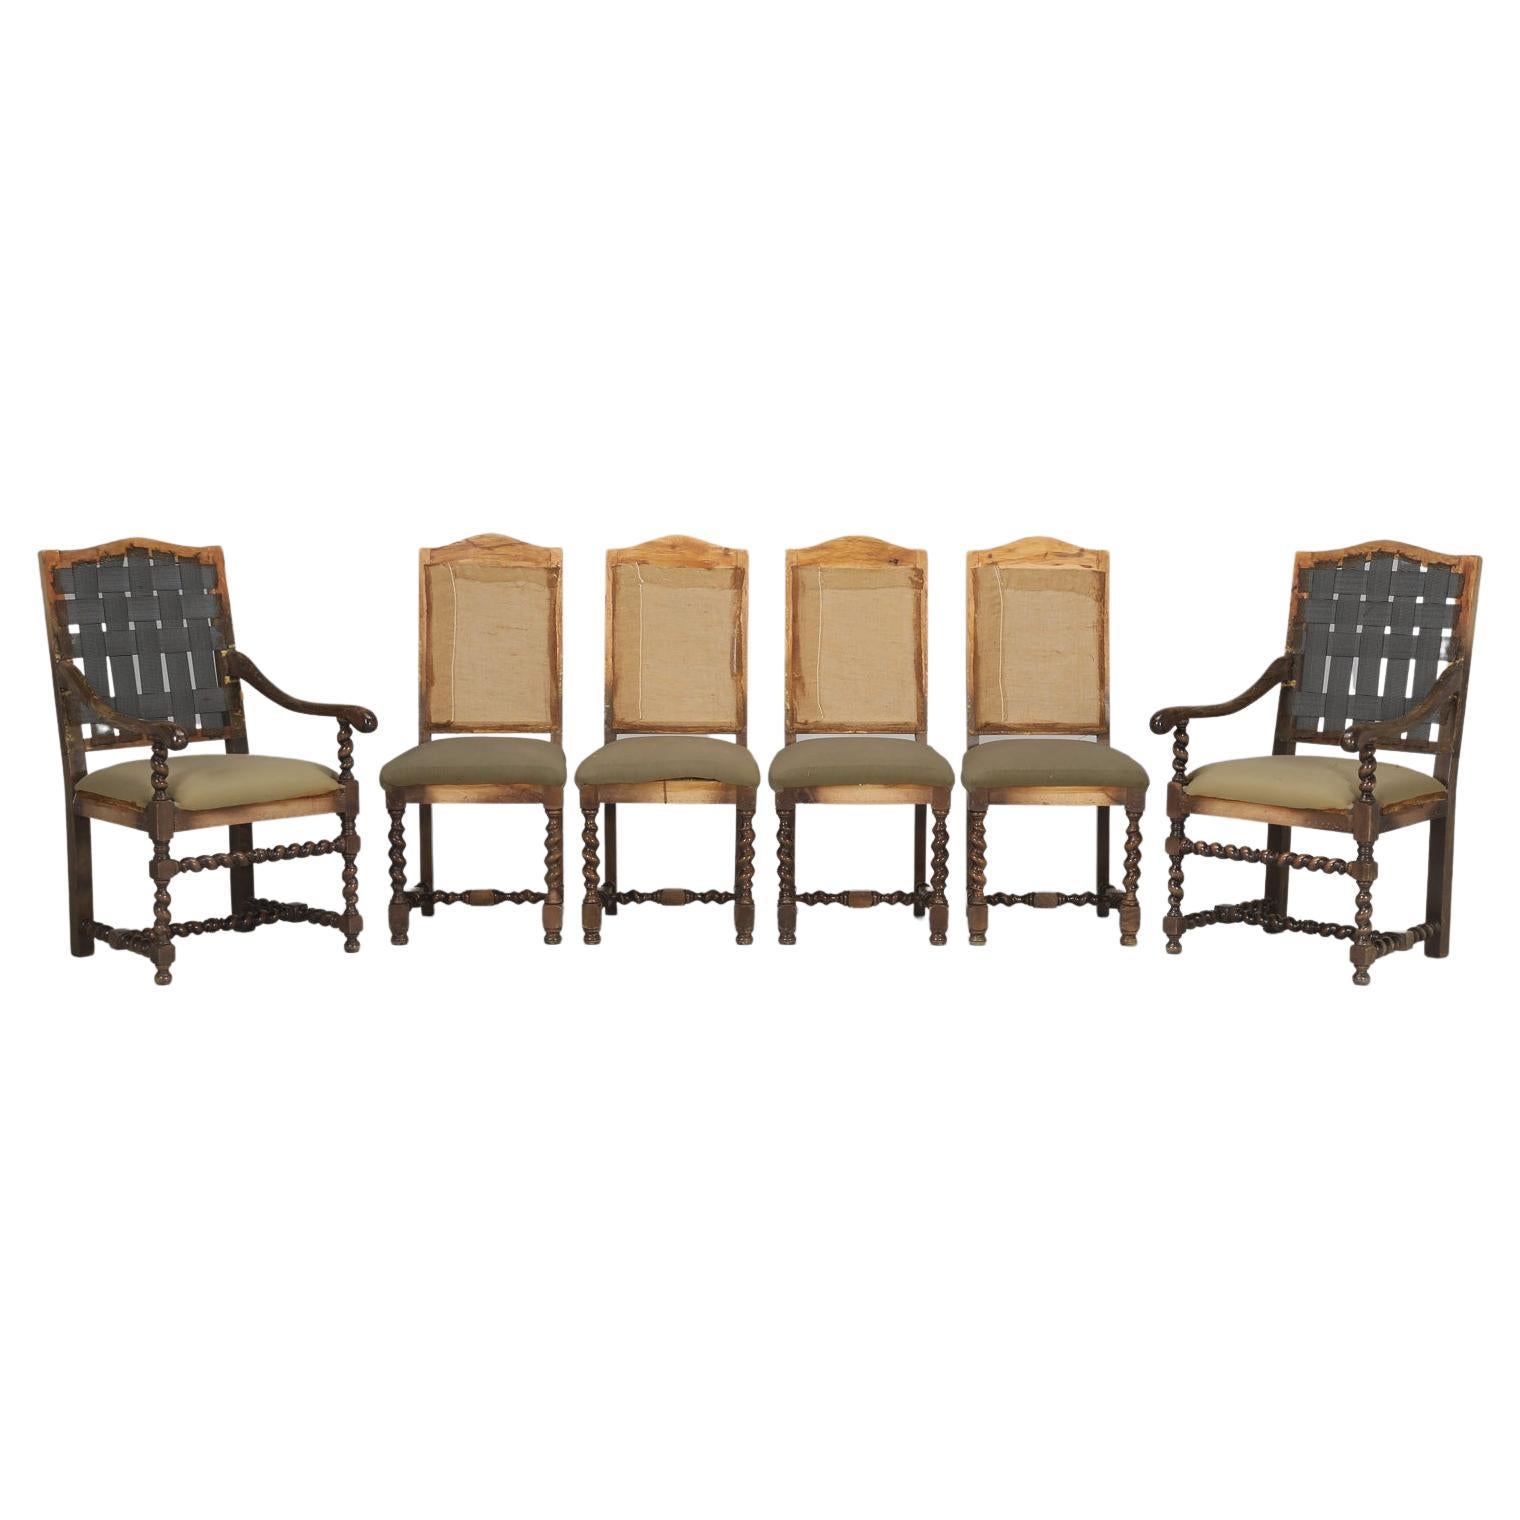 Antique French Dining Room Chairs, Barley Twist Legs, Requiring New Upholstery For Sale